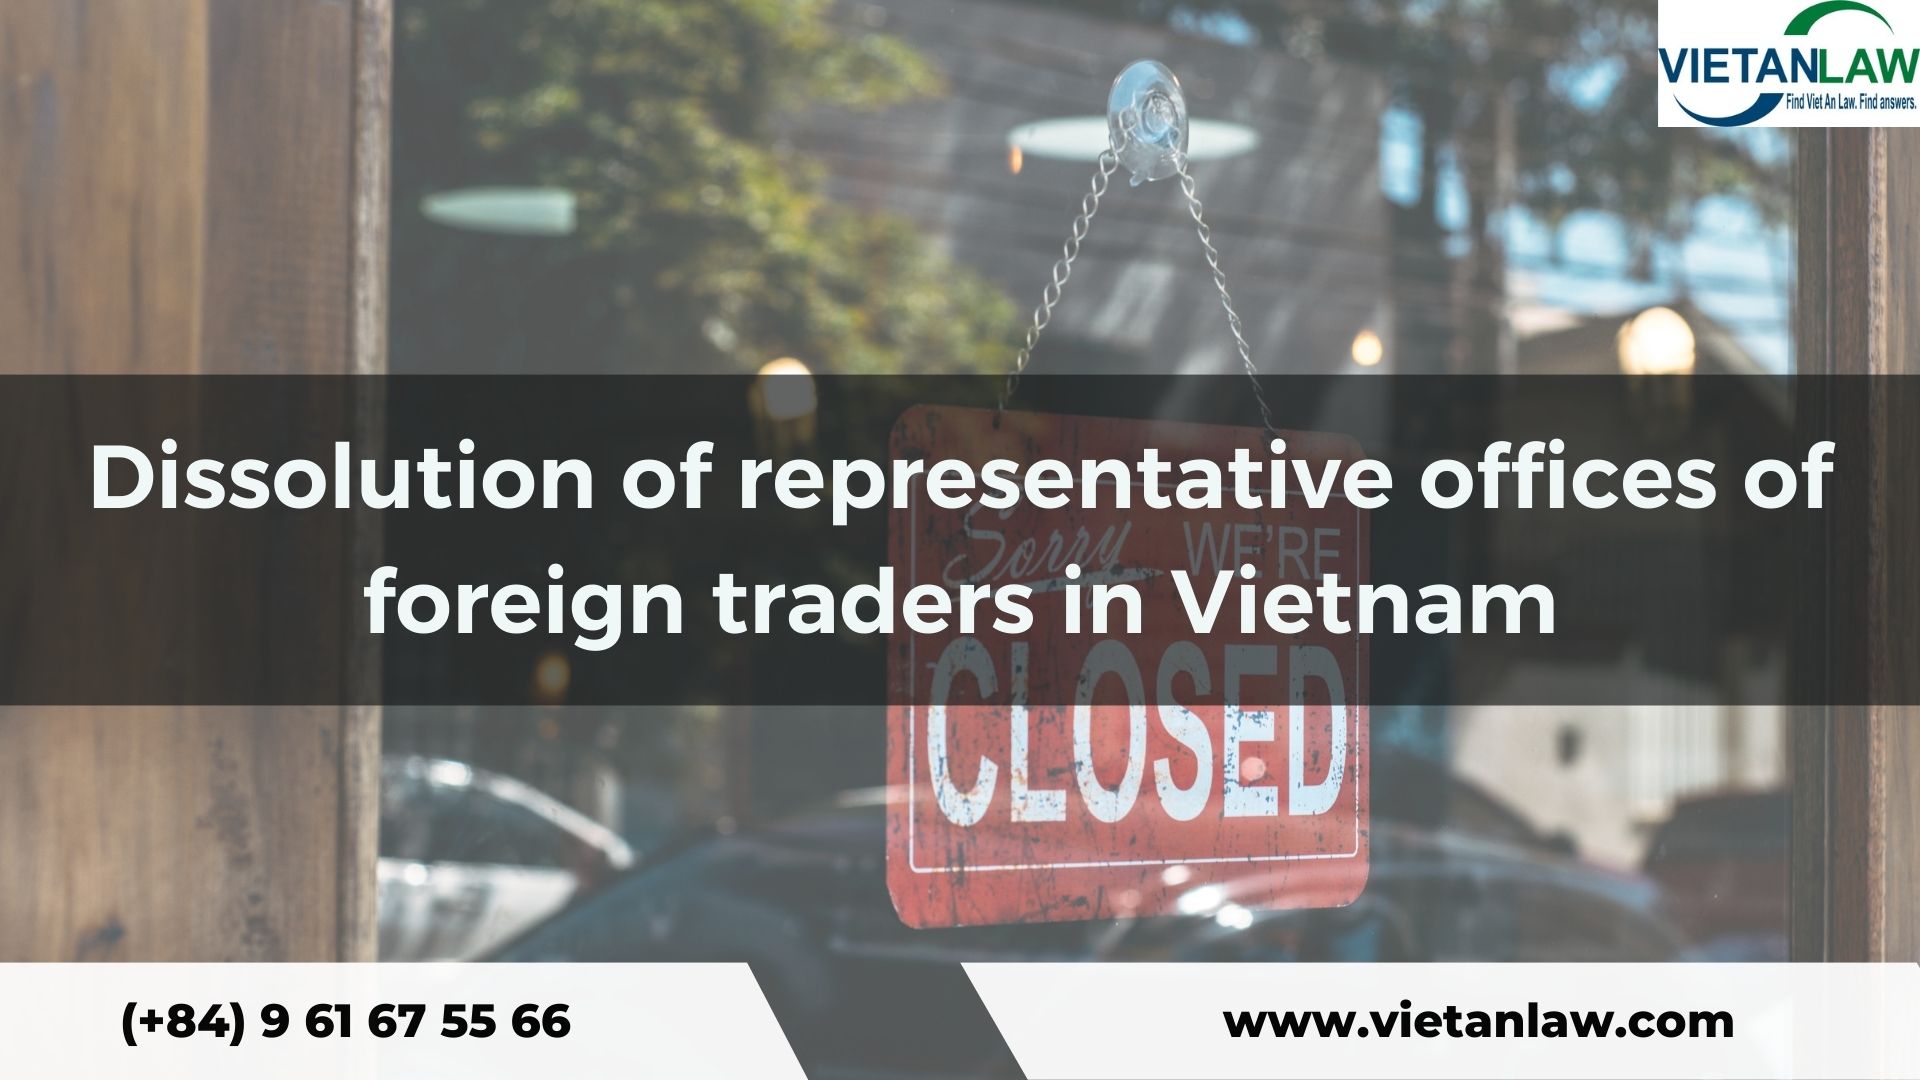 Dissolution of representative offices of foreign traders in Vietnam